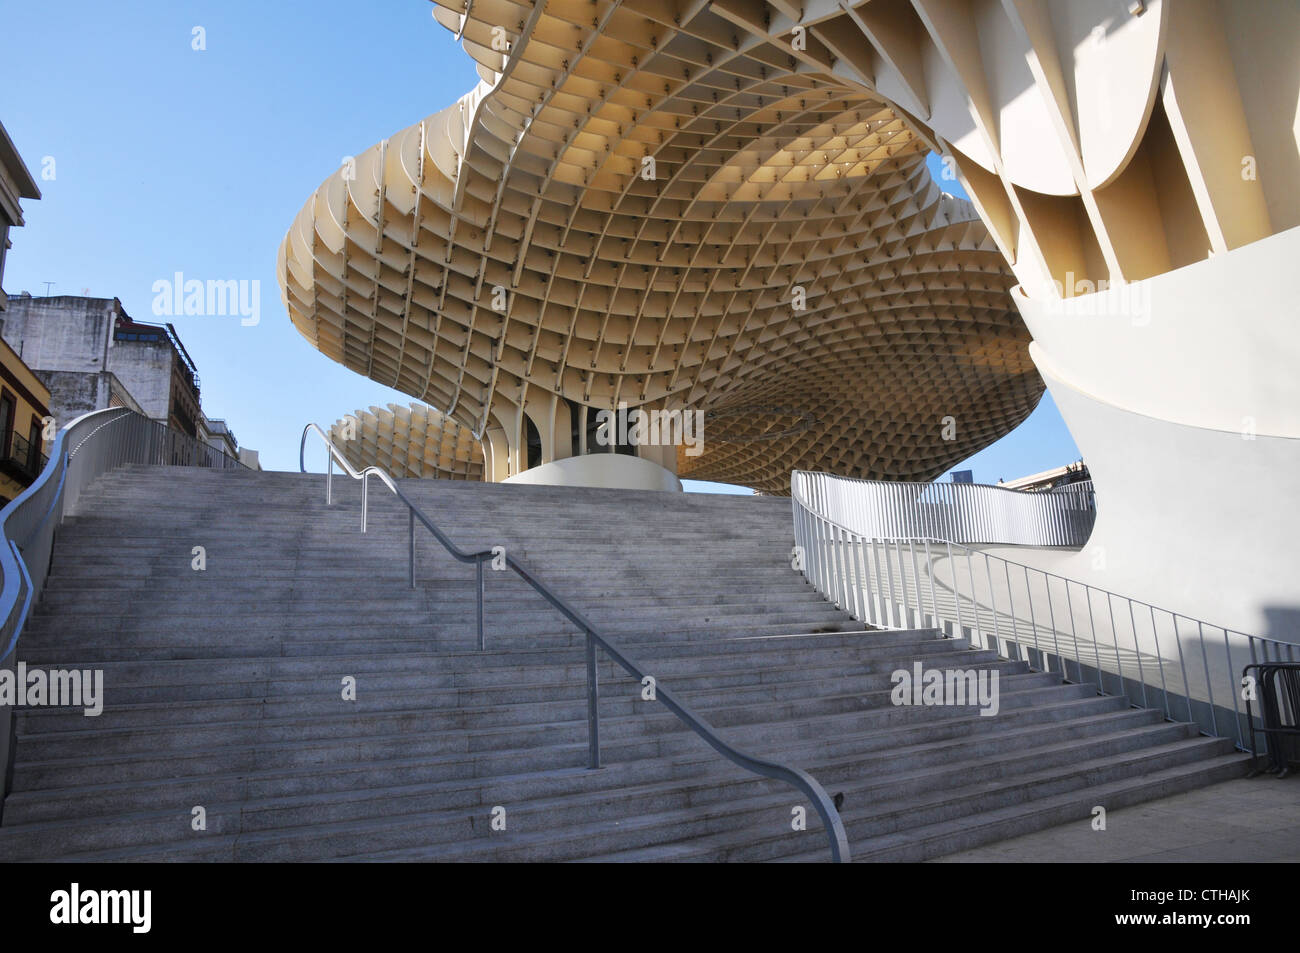 Wide stairway leading from street level, Plaza de la Encarnacion with modern architectural roof structure, Seville, Spain Stock Photo